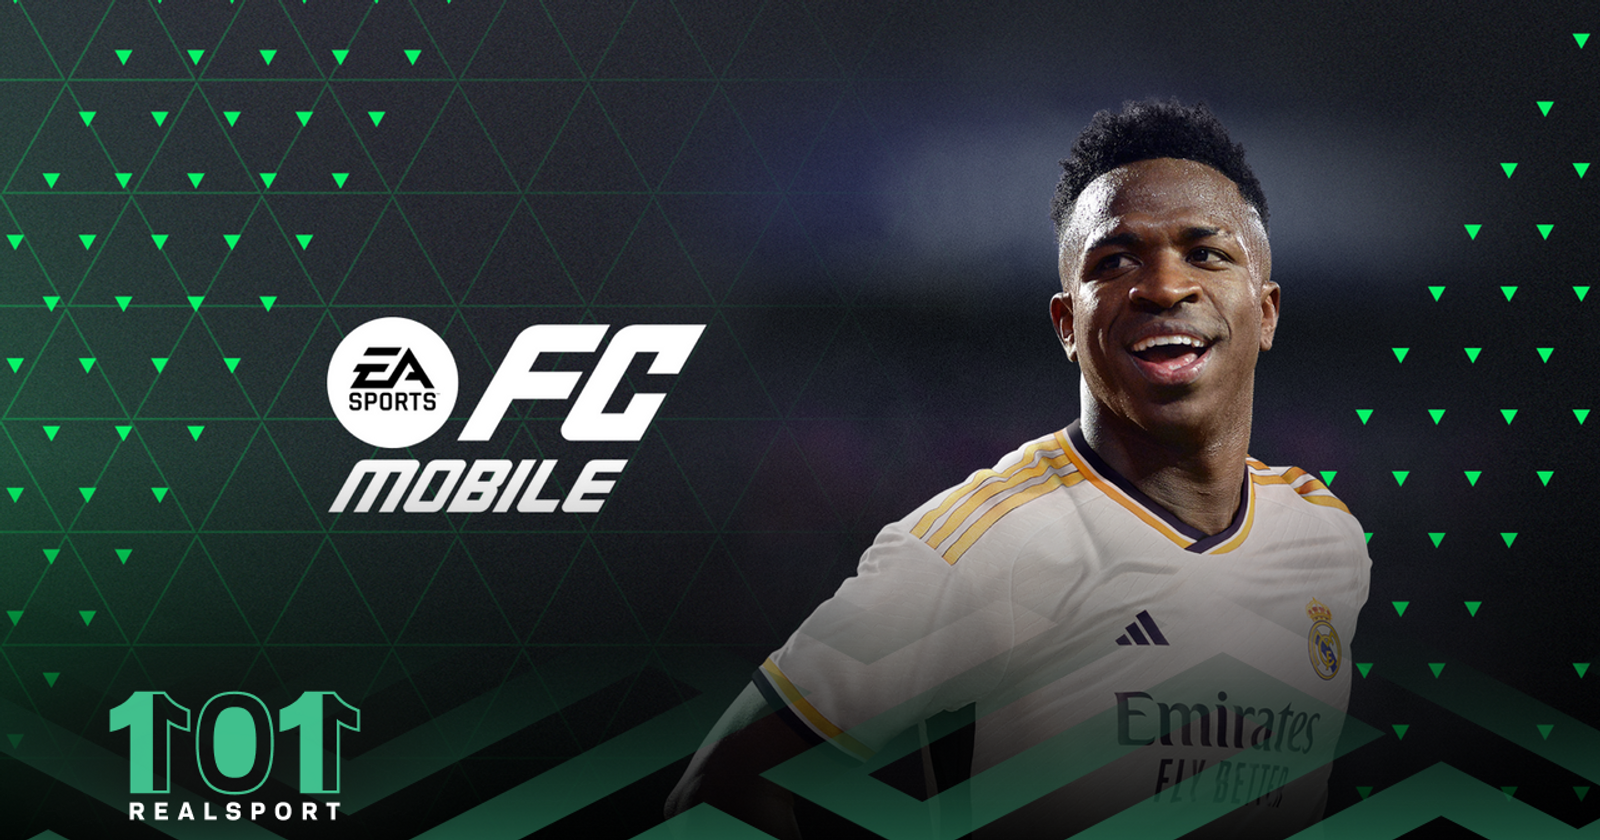 FC Mobile 24 System Requirements